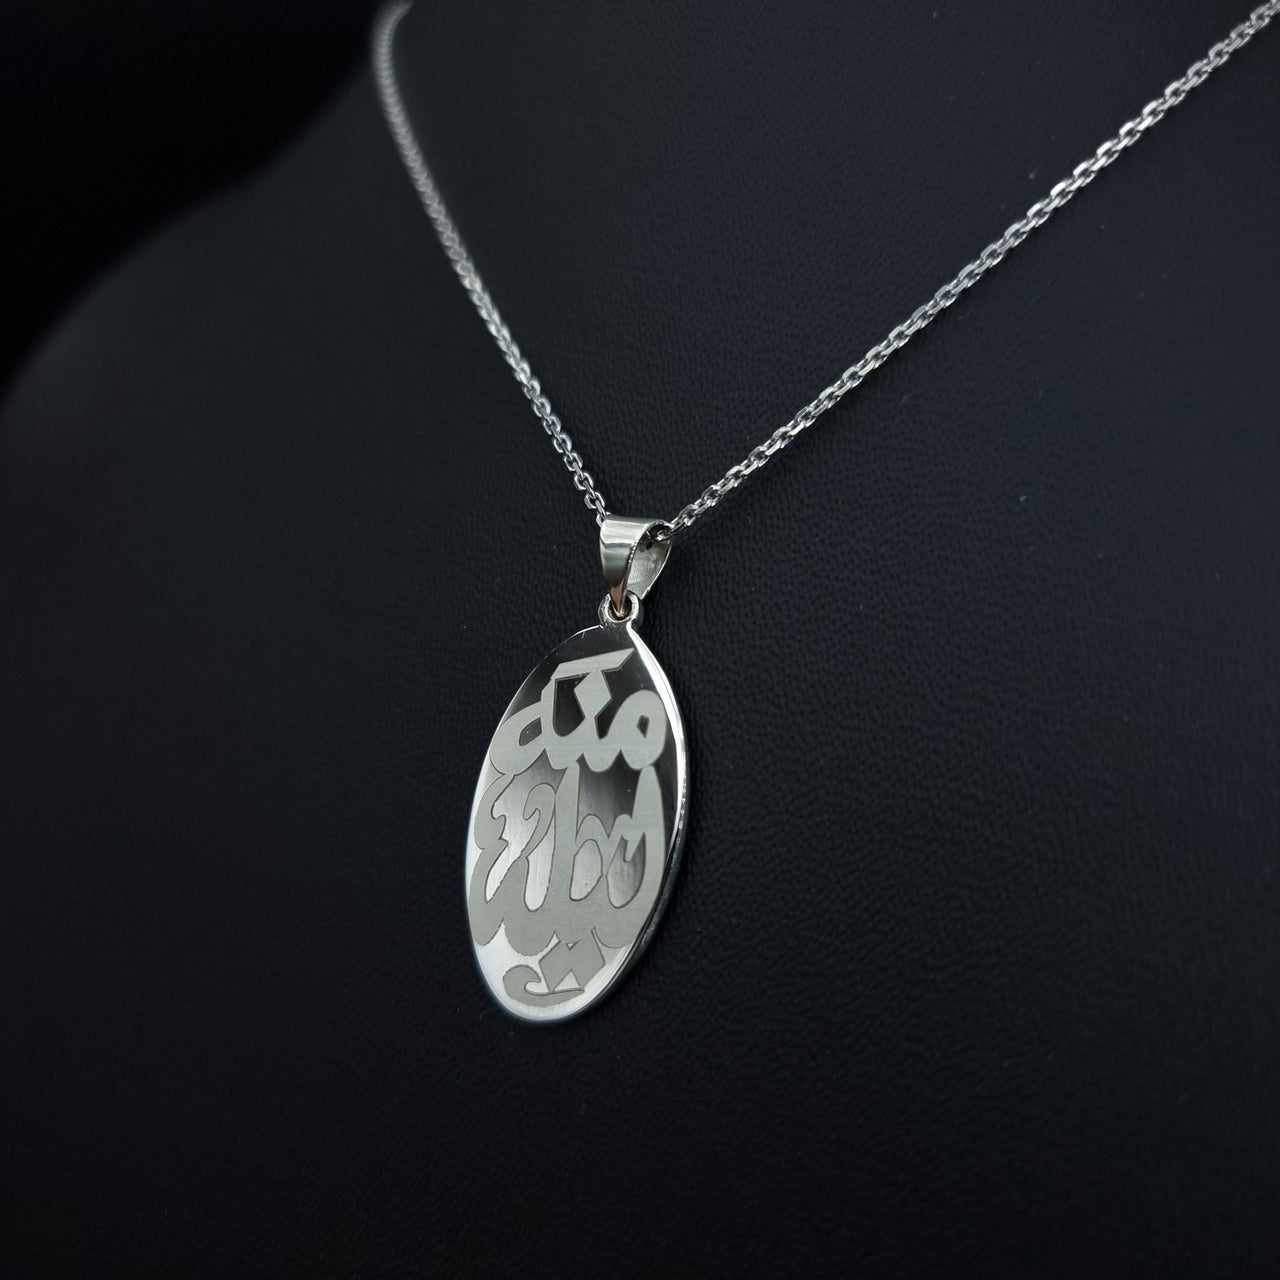 925 Silver - Handmade Personalised Oval Pendant Necklace